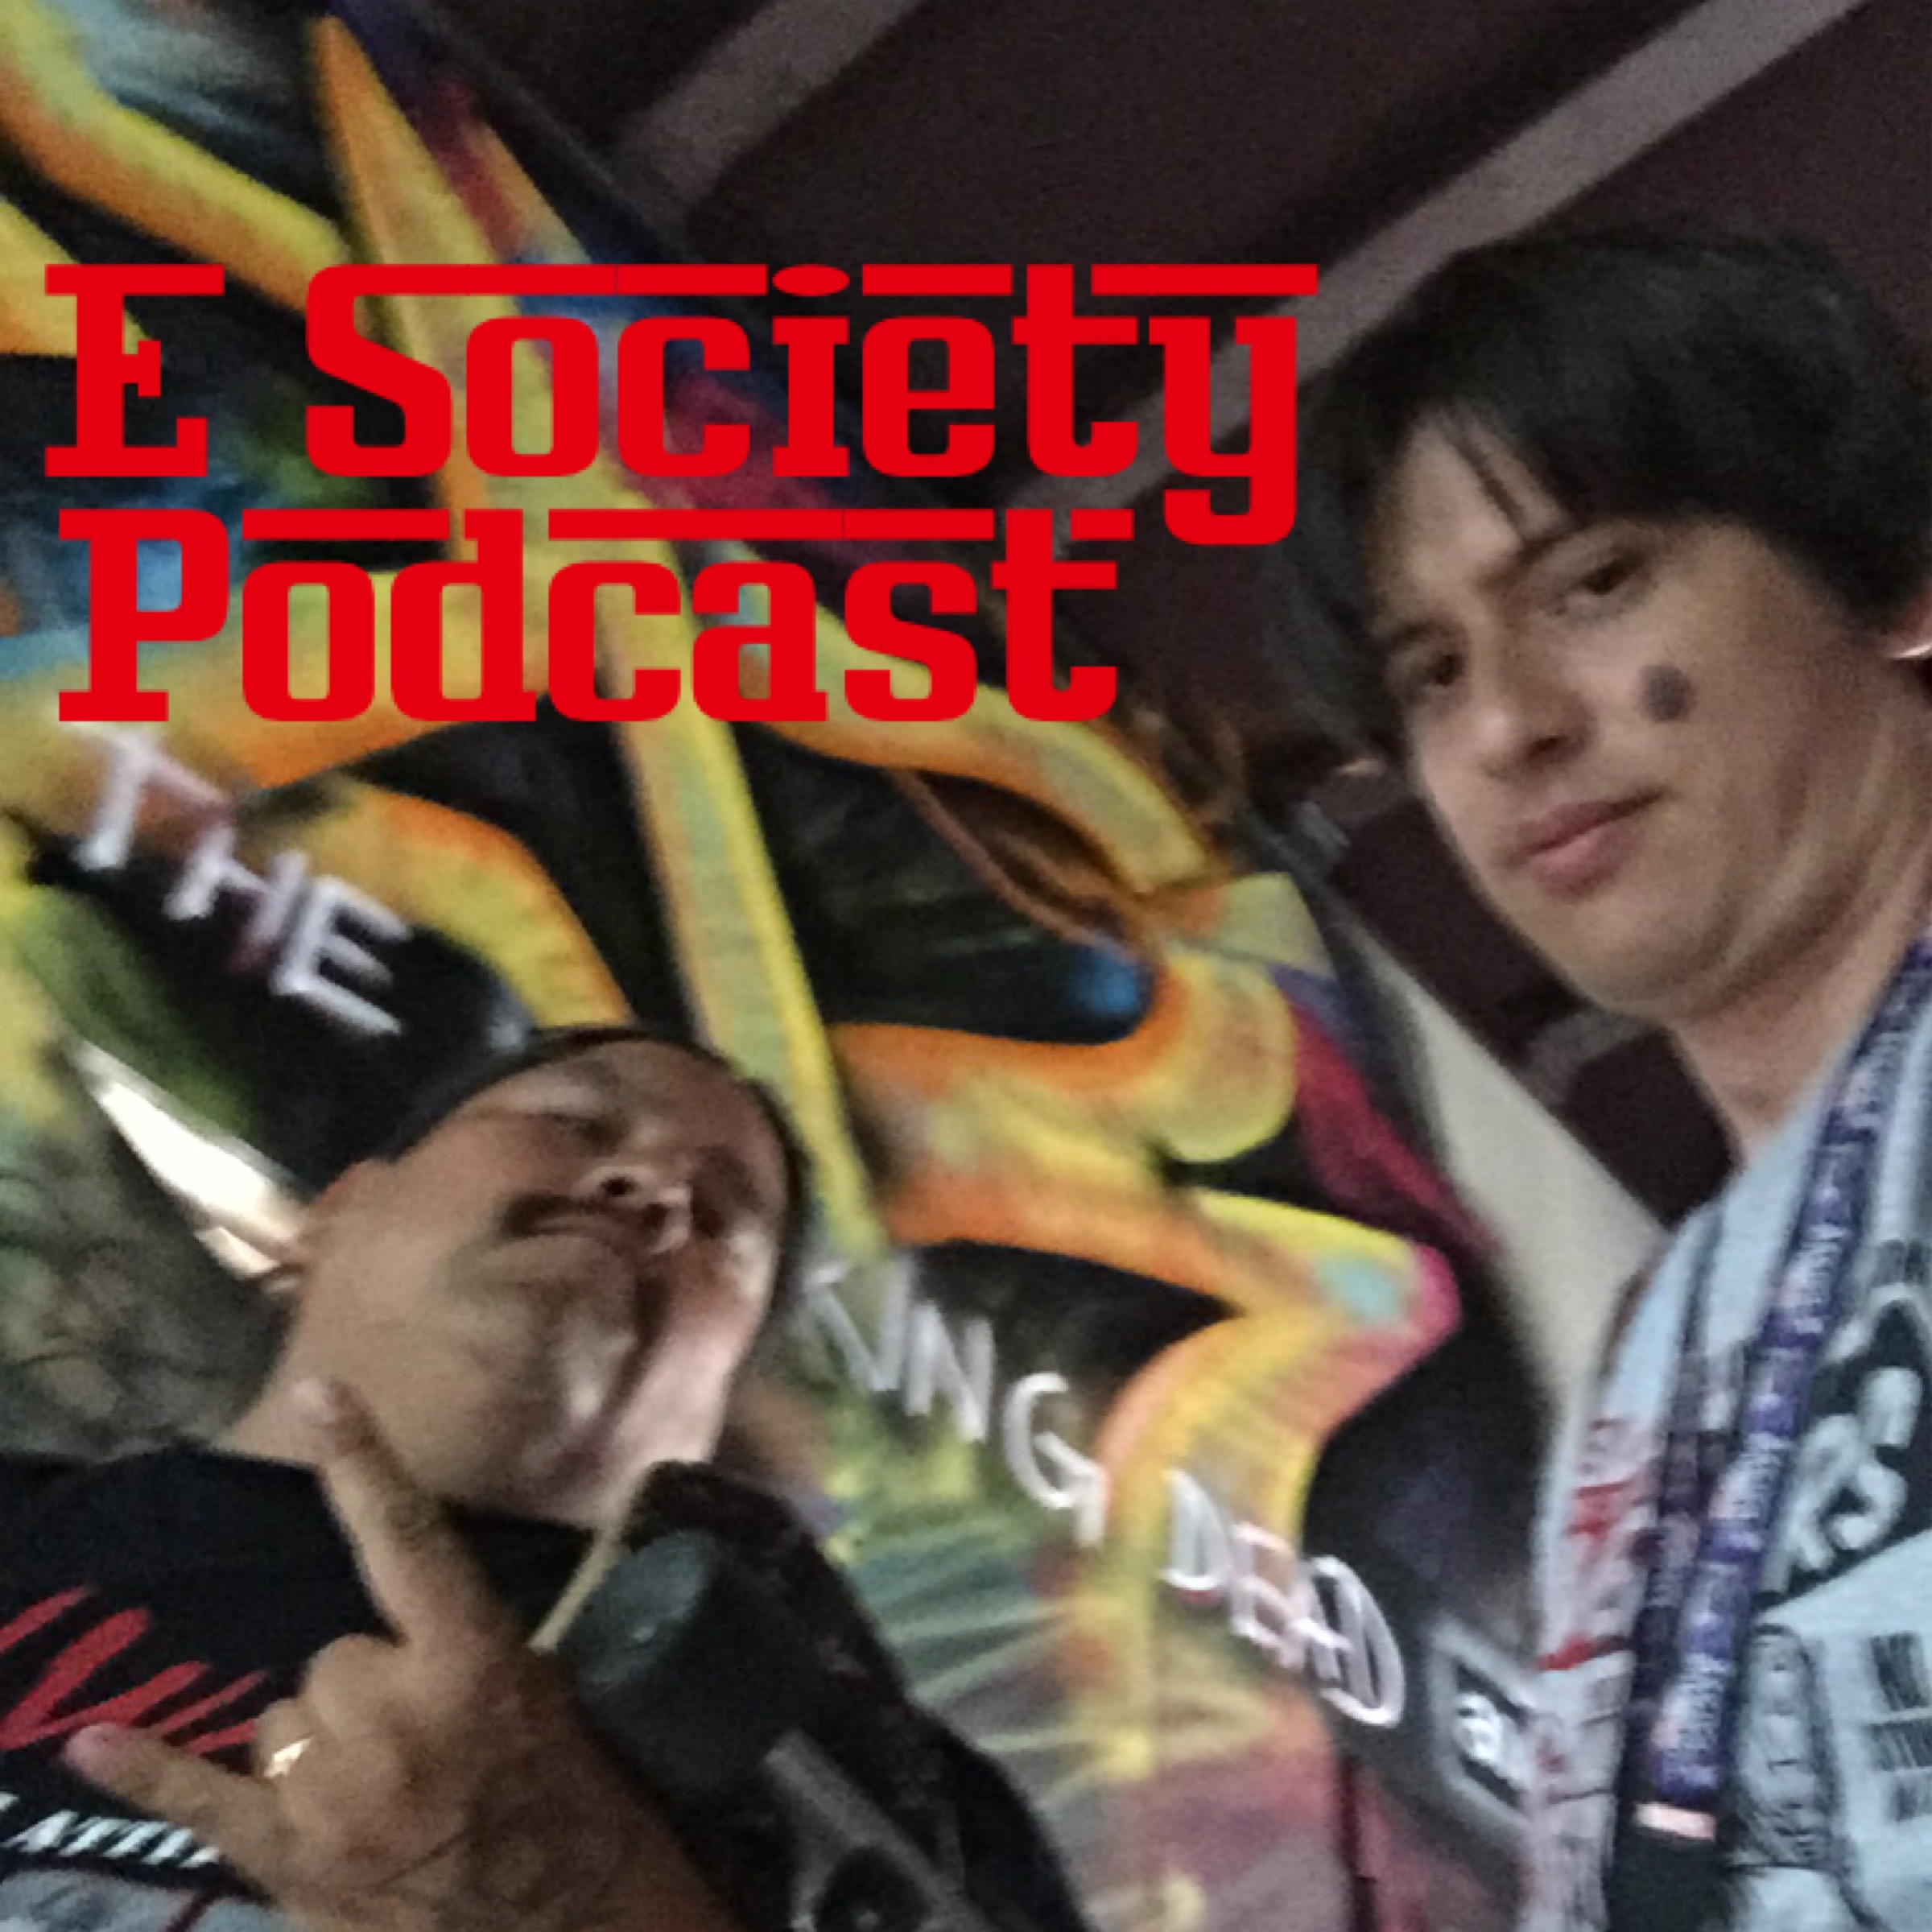 E Society Podcast - Ep. 87: Black Panther and other junk.